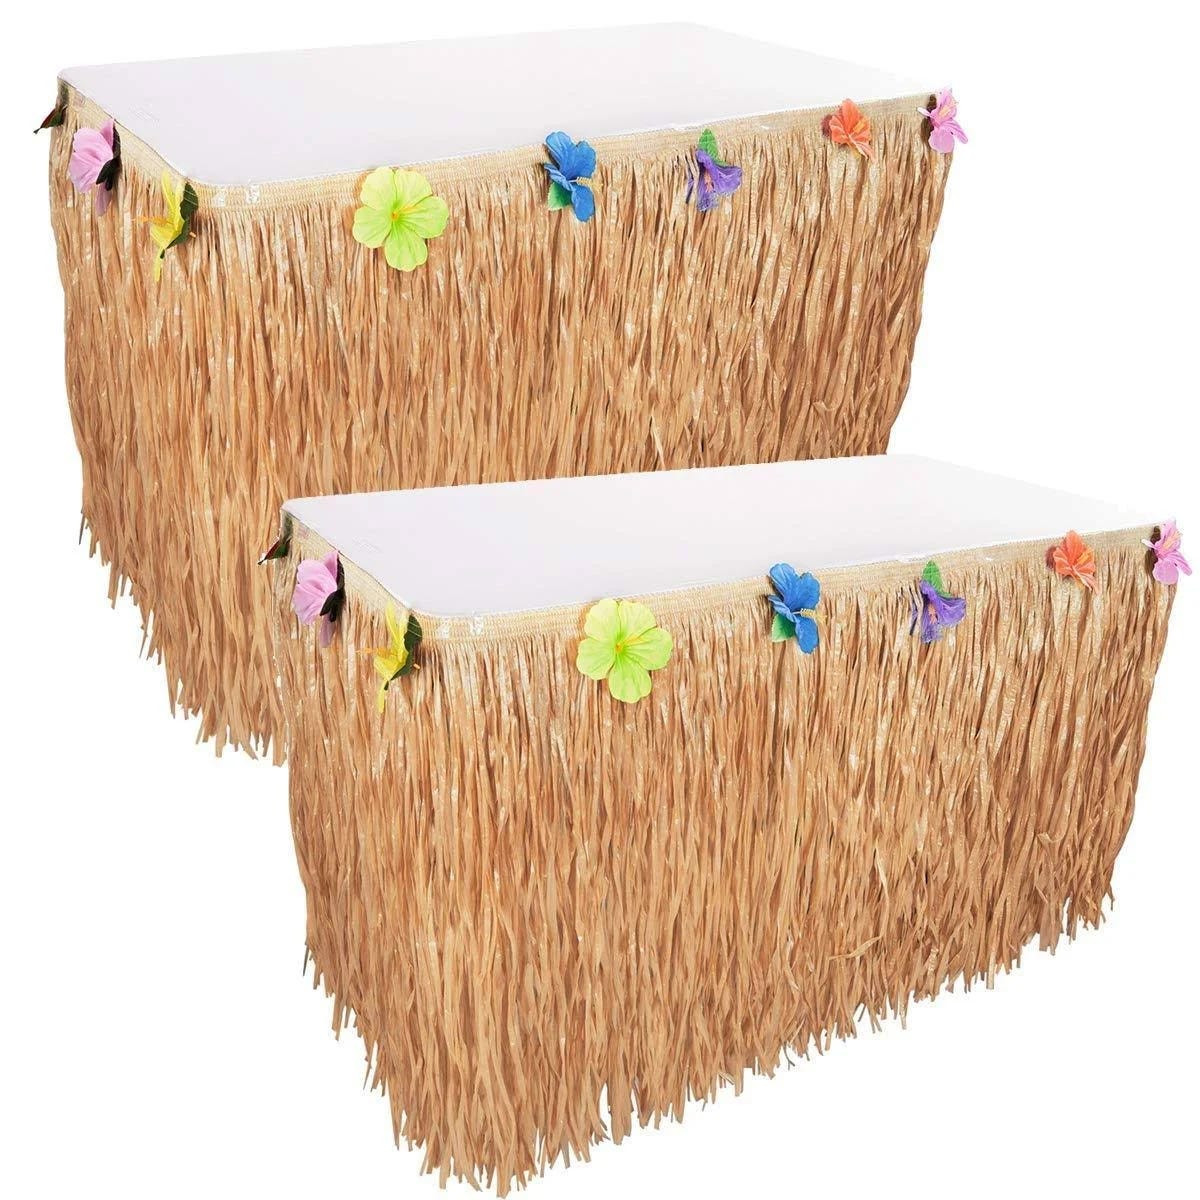 Kicko Luau Hawaiian Table Skirts for 9-Feet & 29-Inch Tables - Real Party Decor for Hibiscus Luau Themes | Image